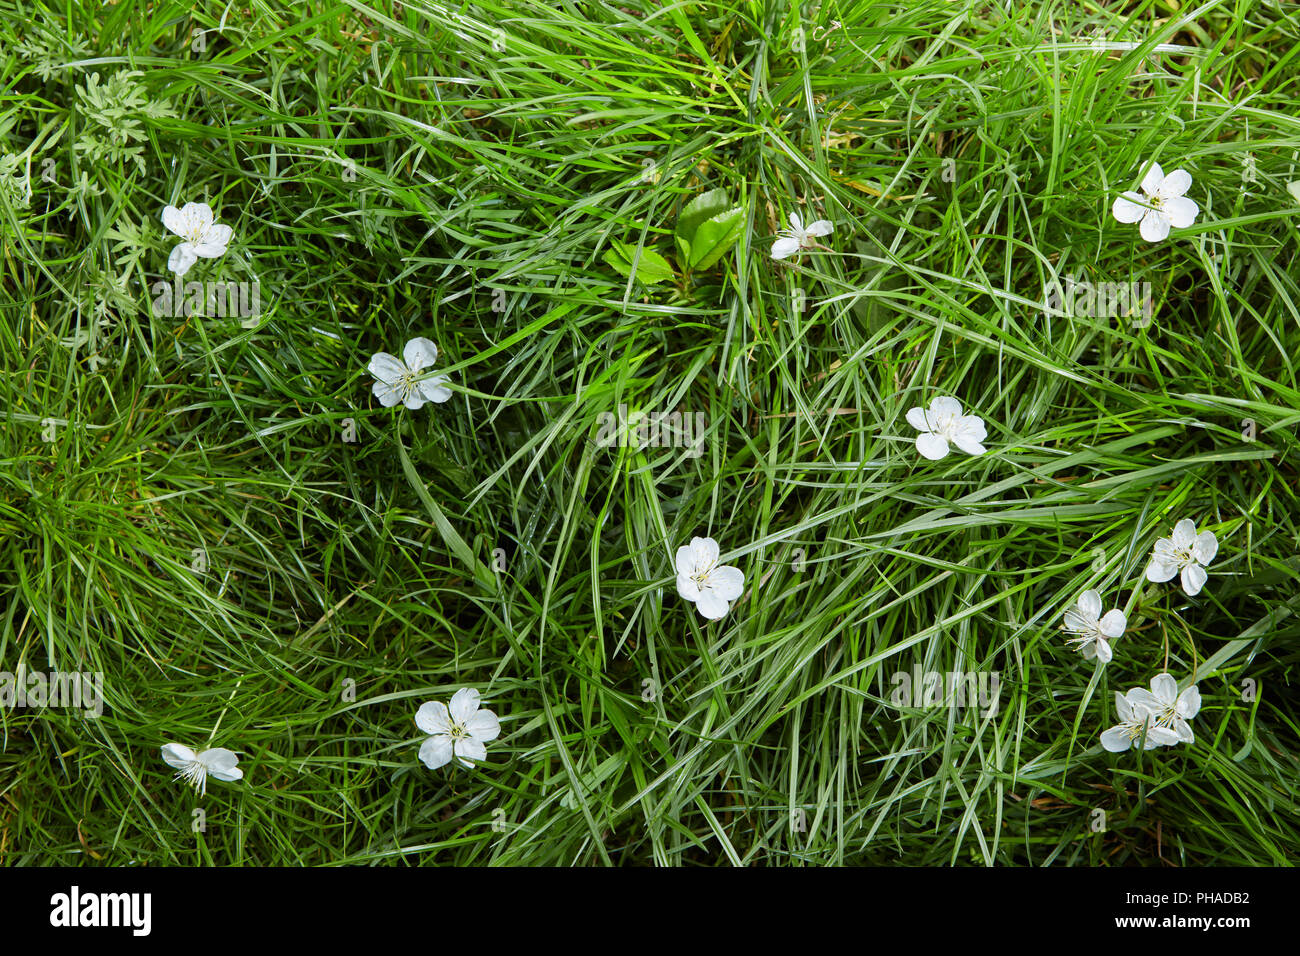 193,840 Small White Flowers Grass Images, Stock Photos, 3D objects, &  Vectors